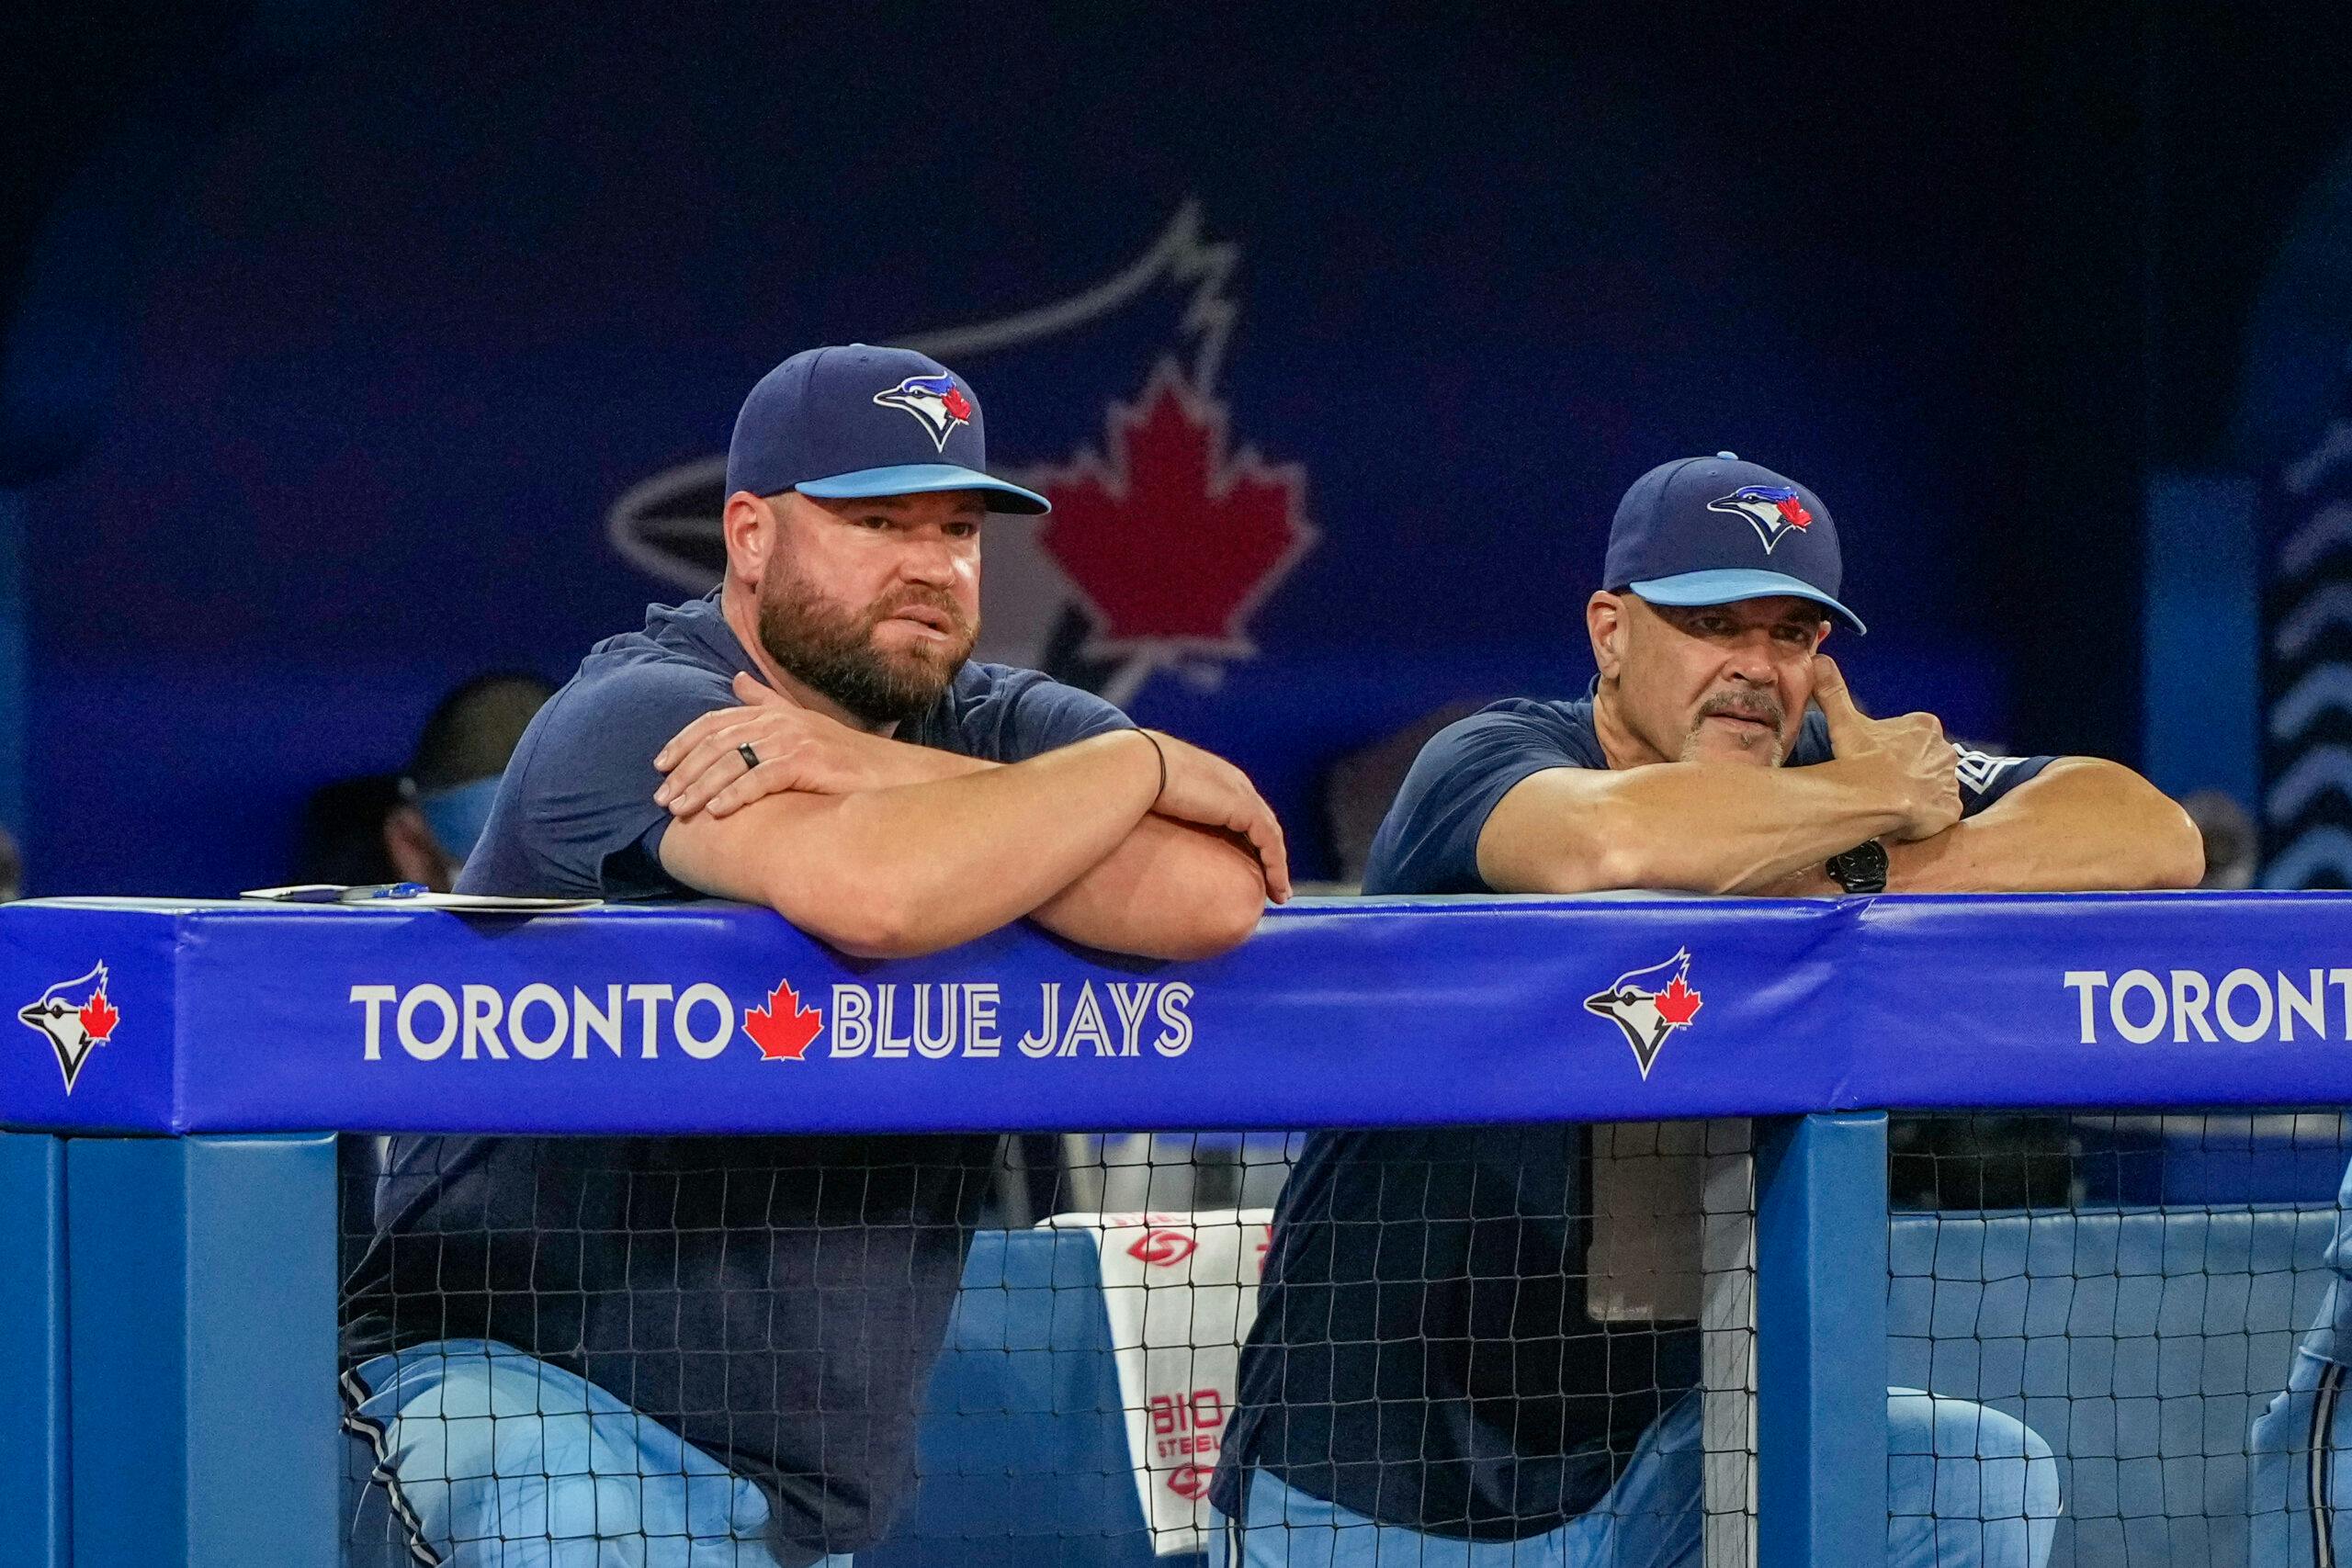 Dante Bichette moves to special assistant role with Toronto Blue Jays 